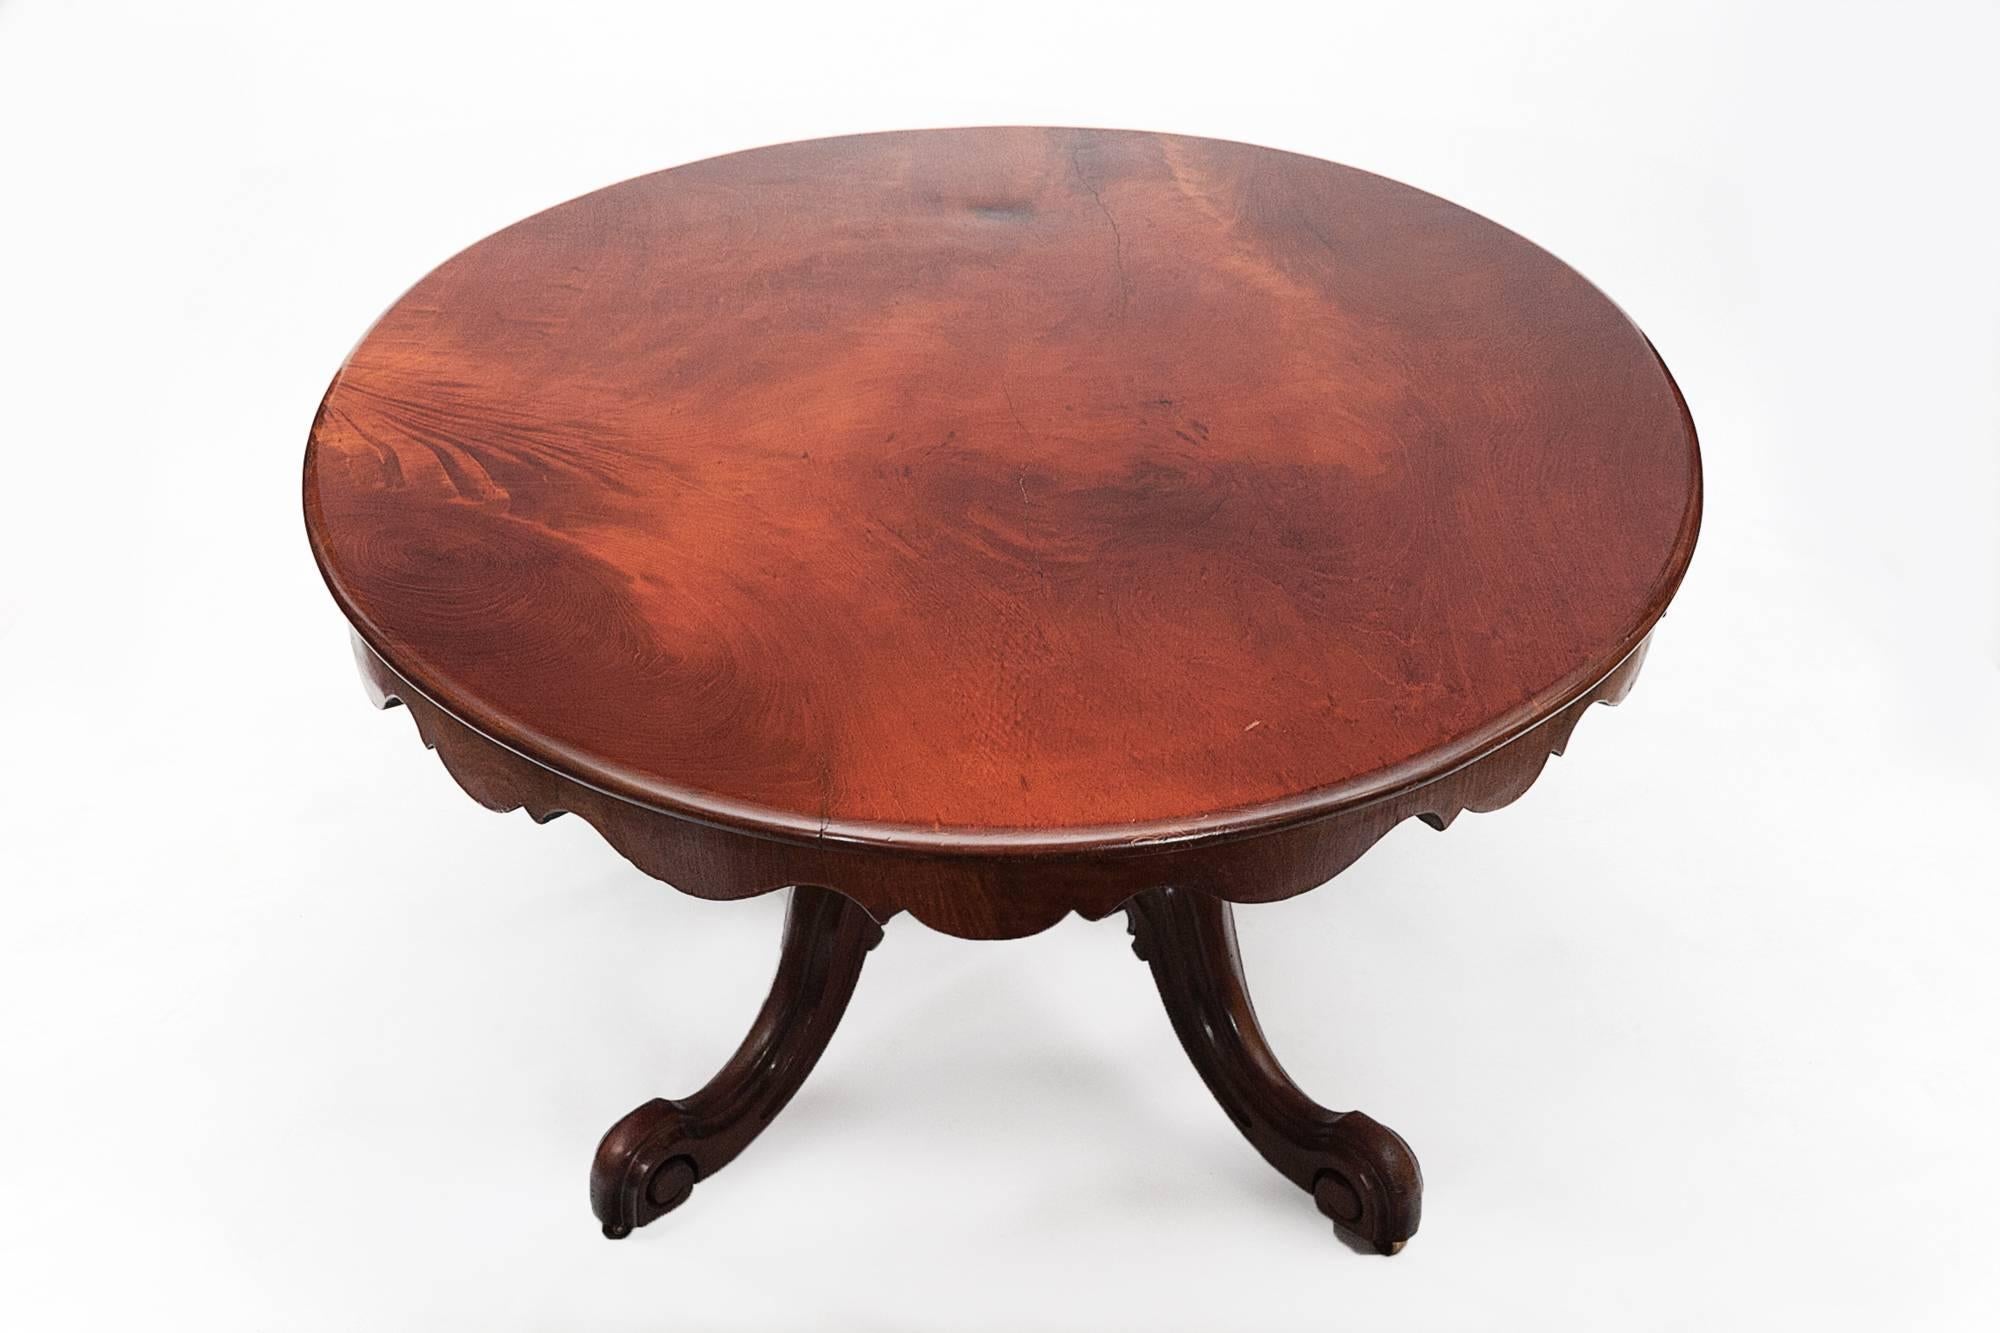 19th century mahogany oval tip-up supper table with moulded top and shaped apron raised on acanthus carved baluster pod and down swept legs and scrolled feet on casters.